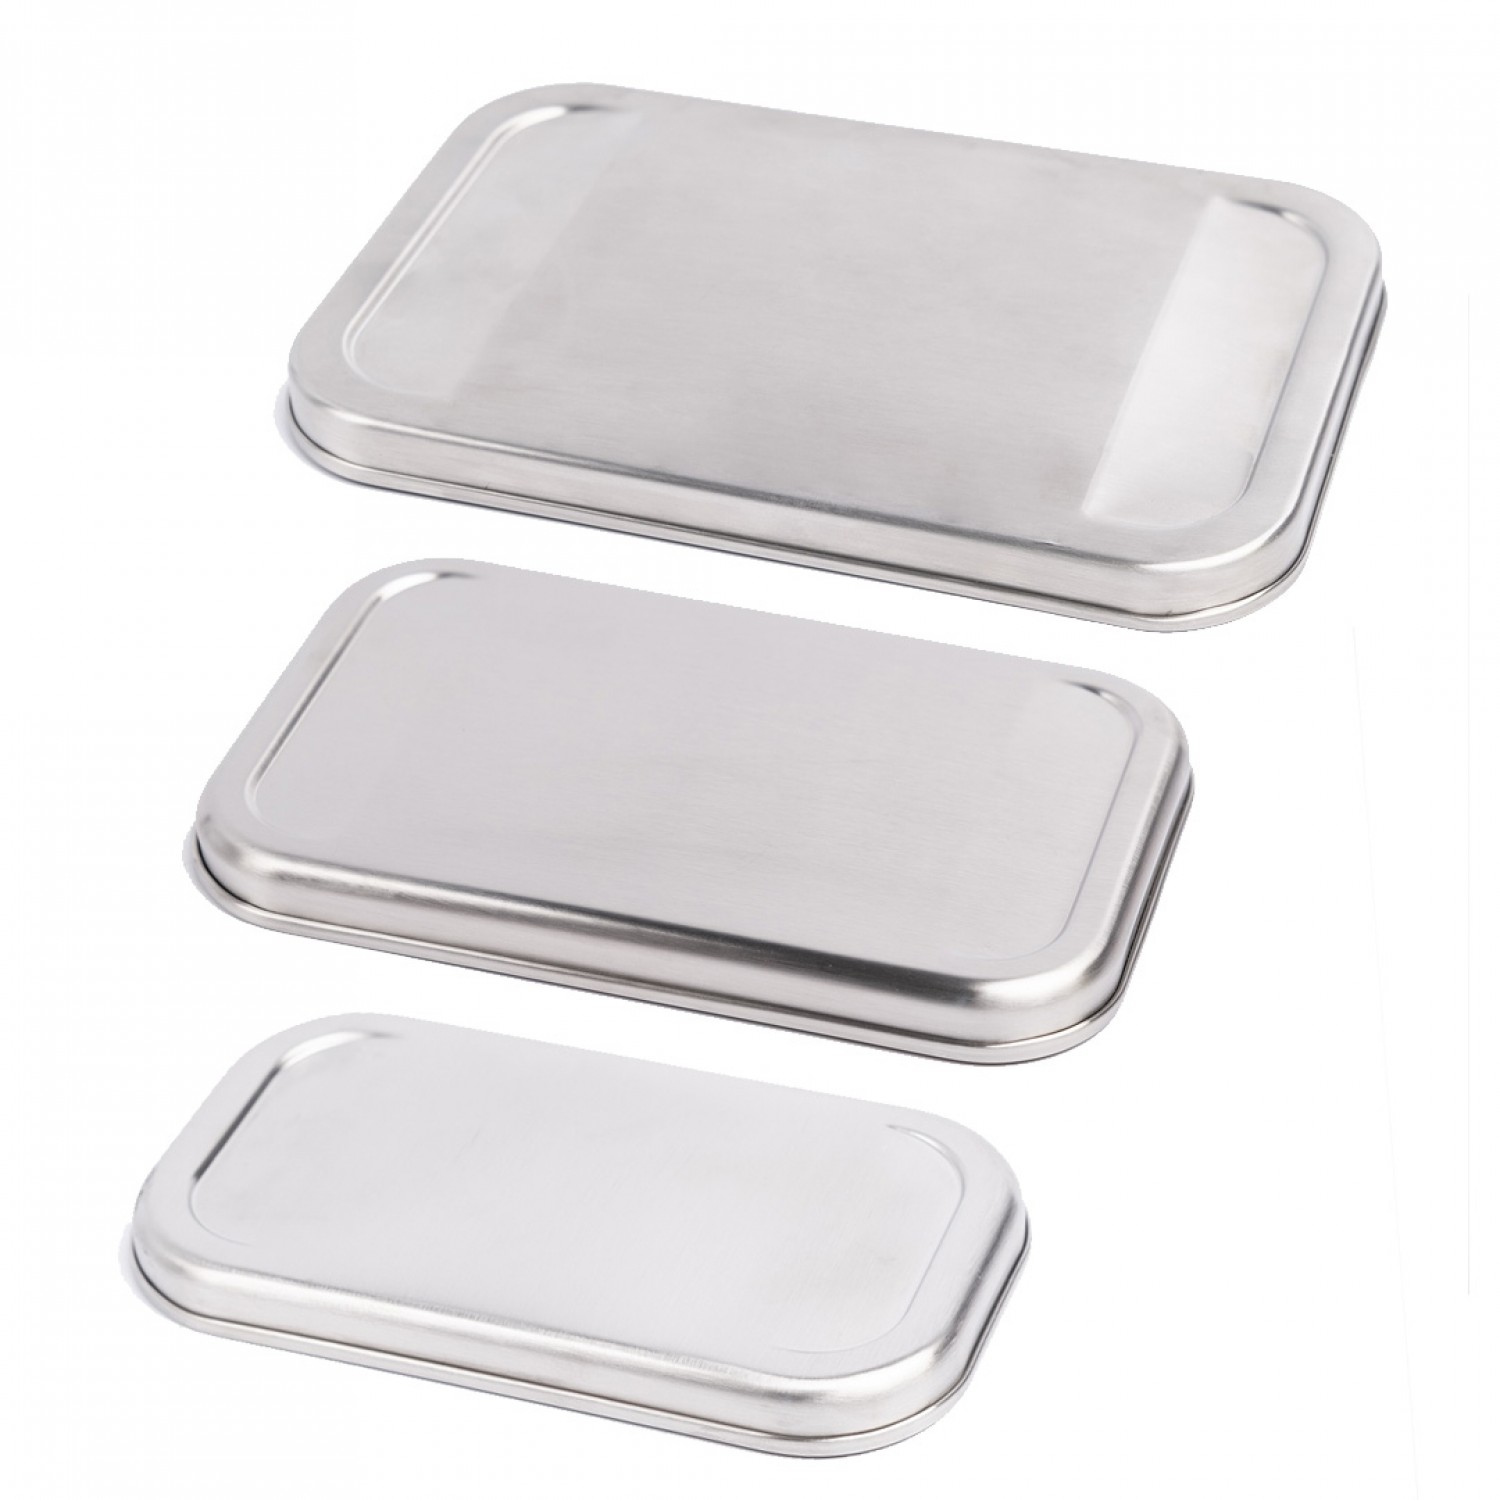 Tindobo Stainless Steel Replacement Lid for Lunchboxes